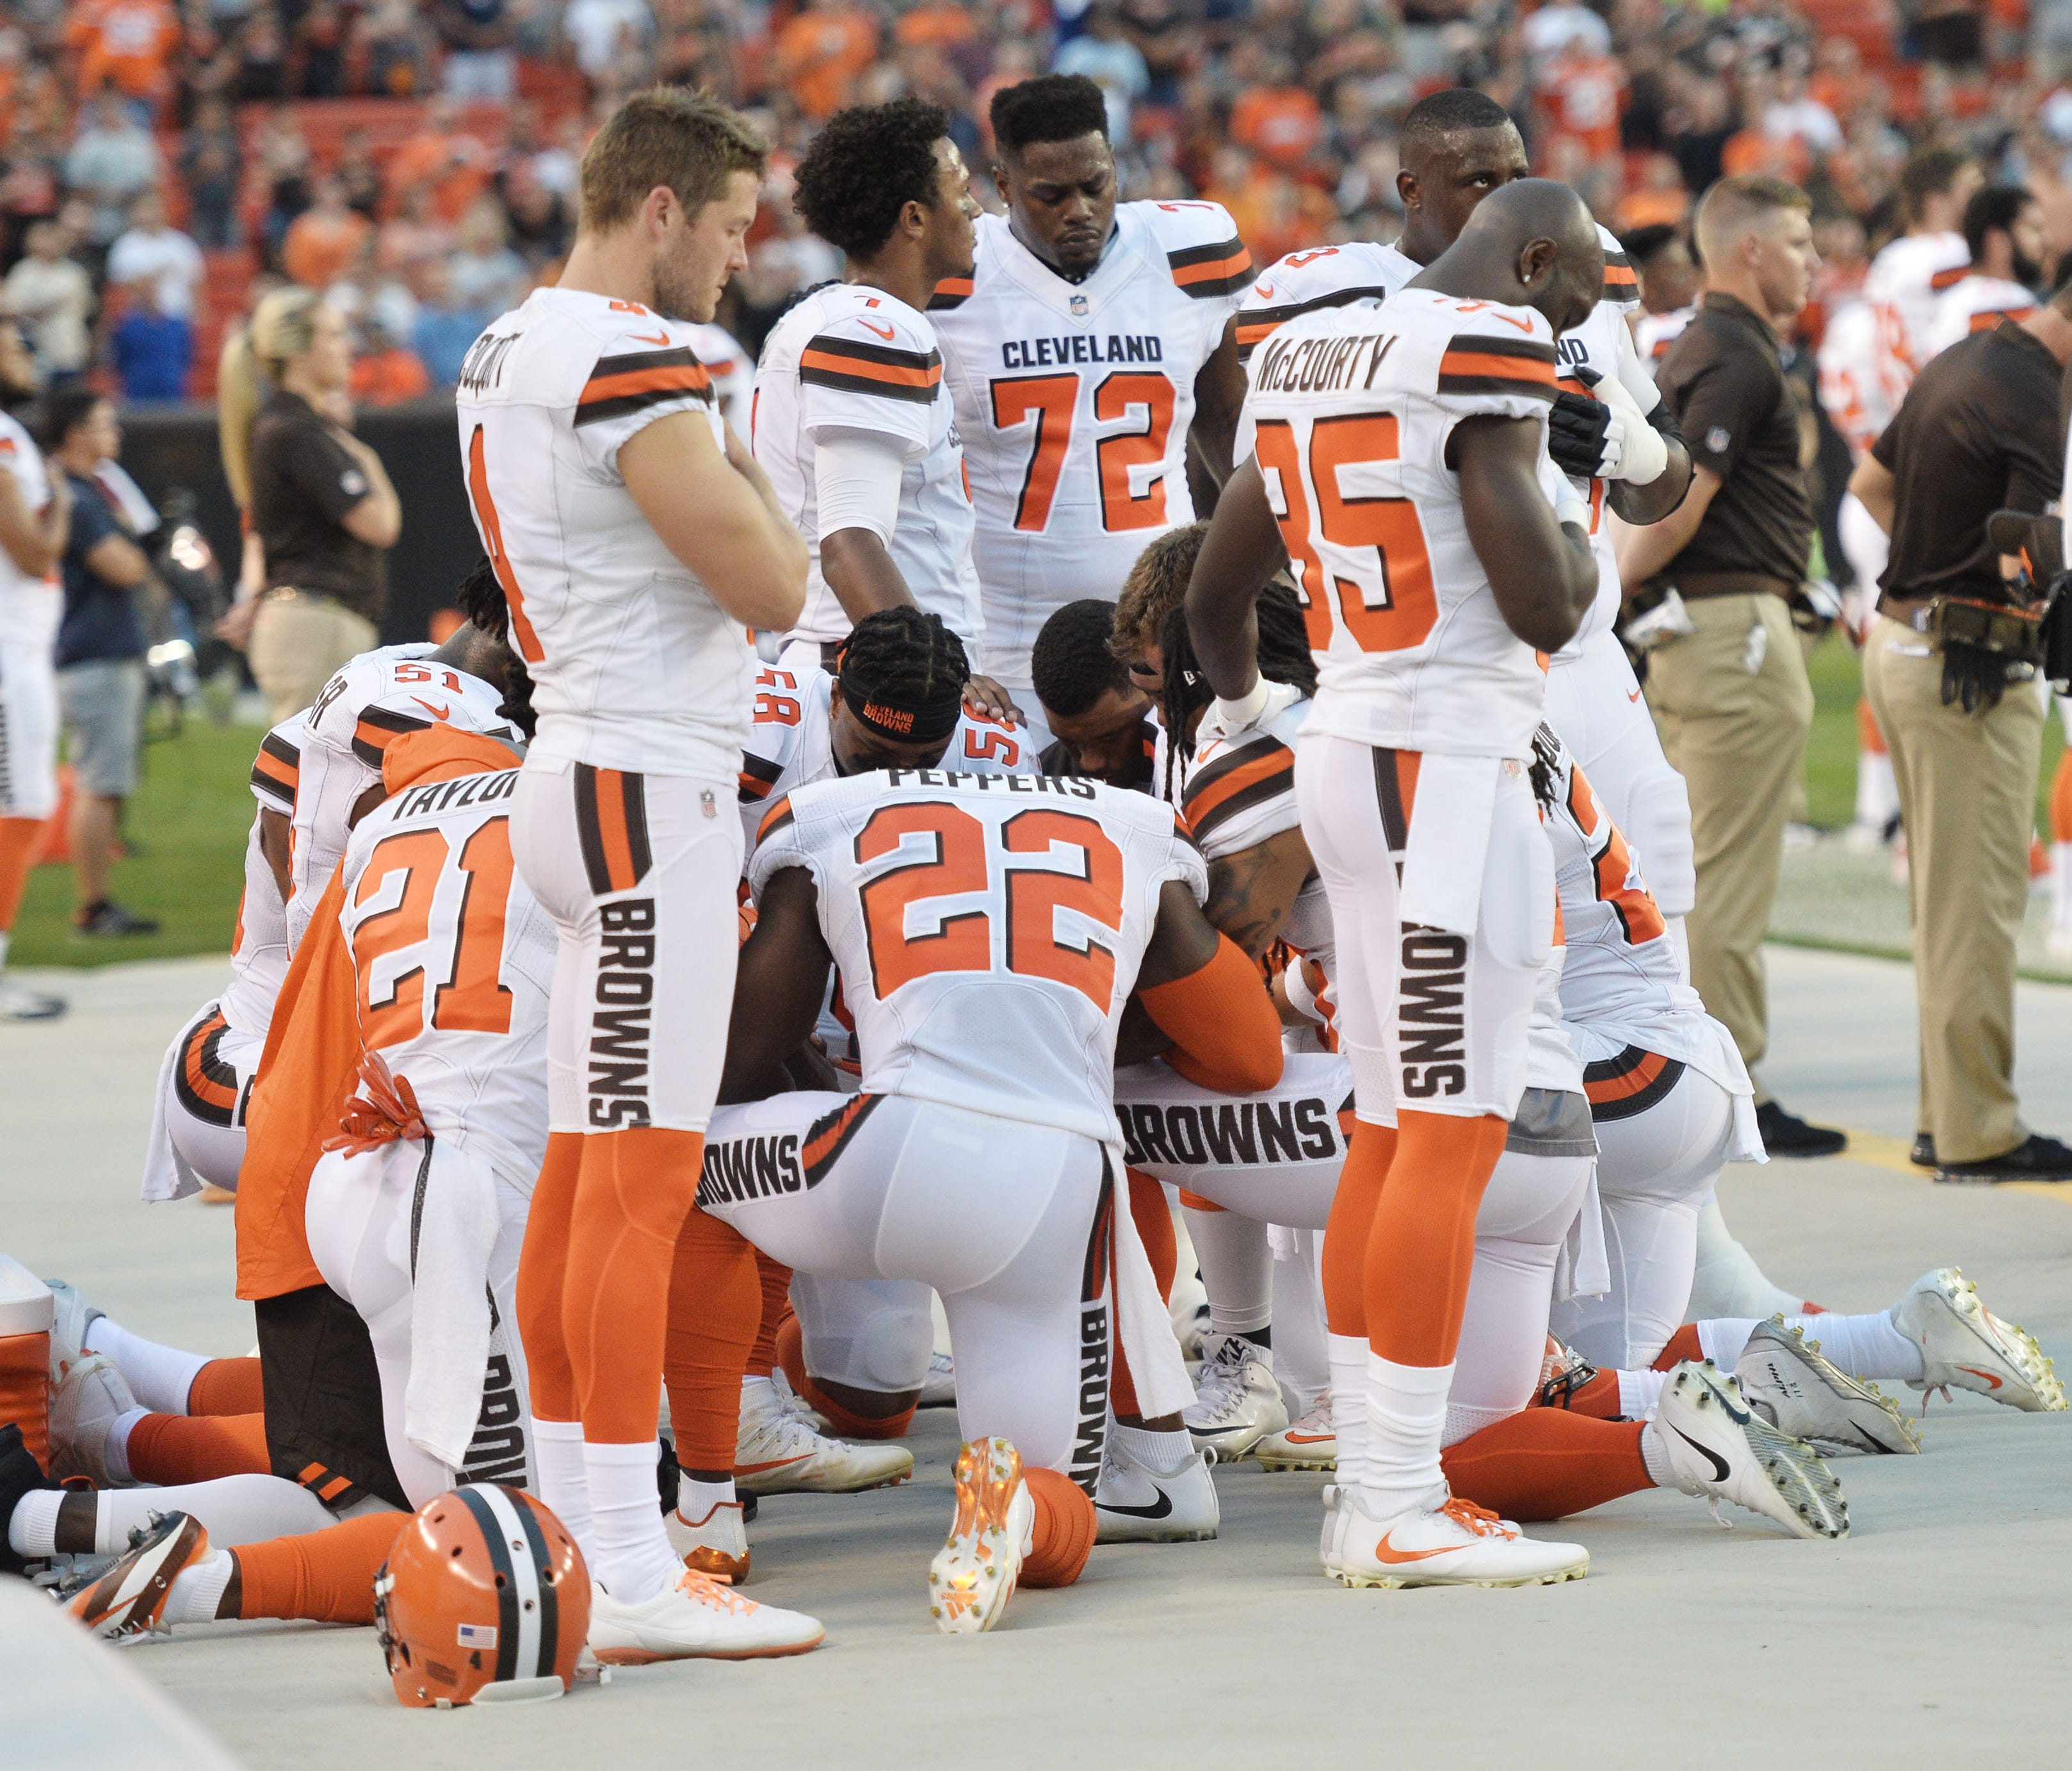 Members of the Cleveland Browns kneel during the national anthem before a game against the New York Giants at FirstEnergy Stadium.